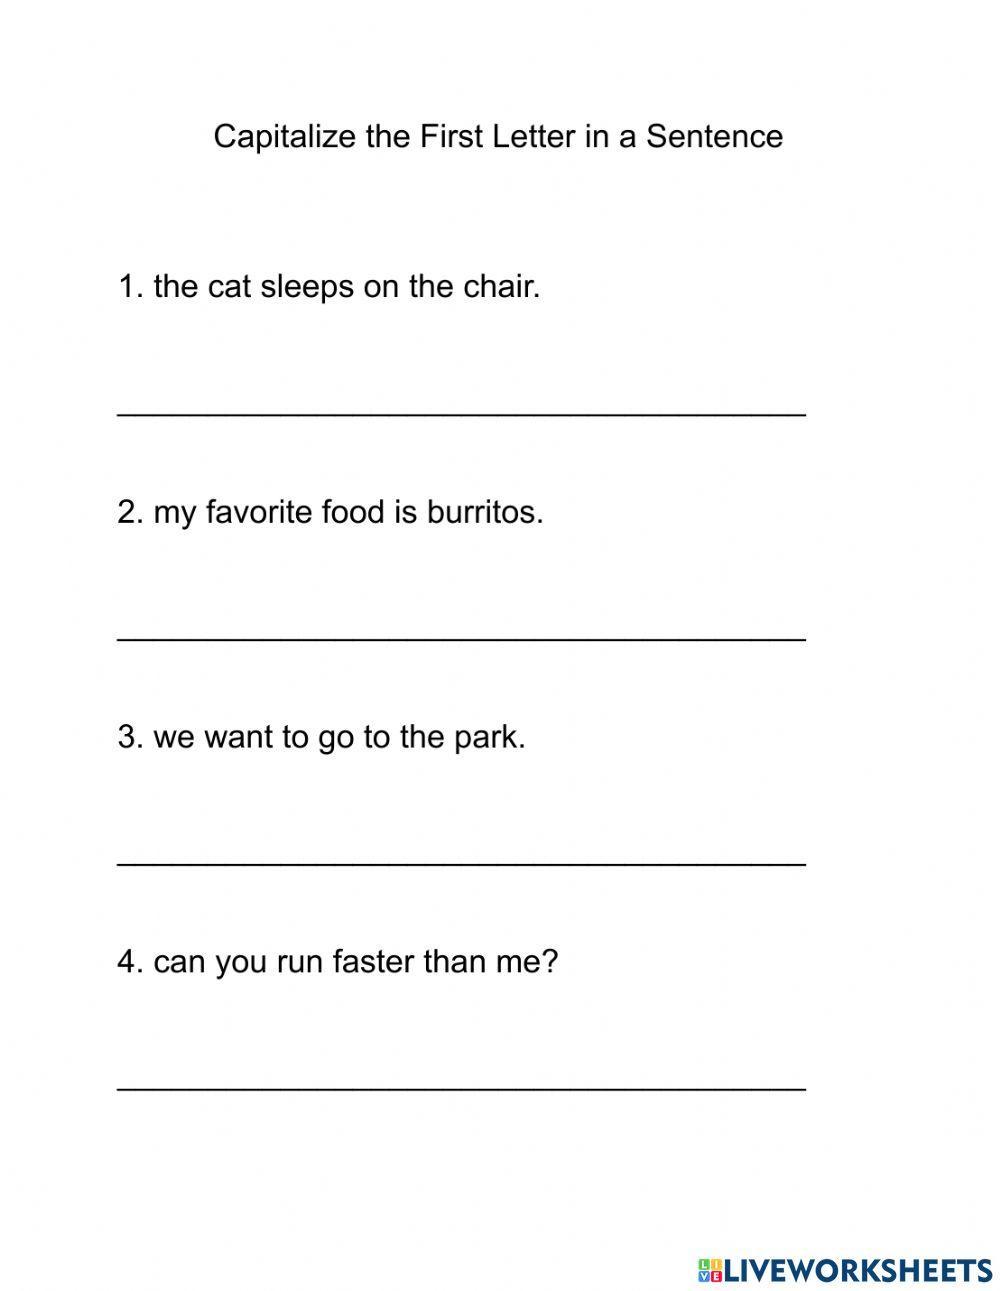 capitalize-the-first-letter-of-the-sentence-worksheet-live-worksheets